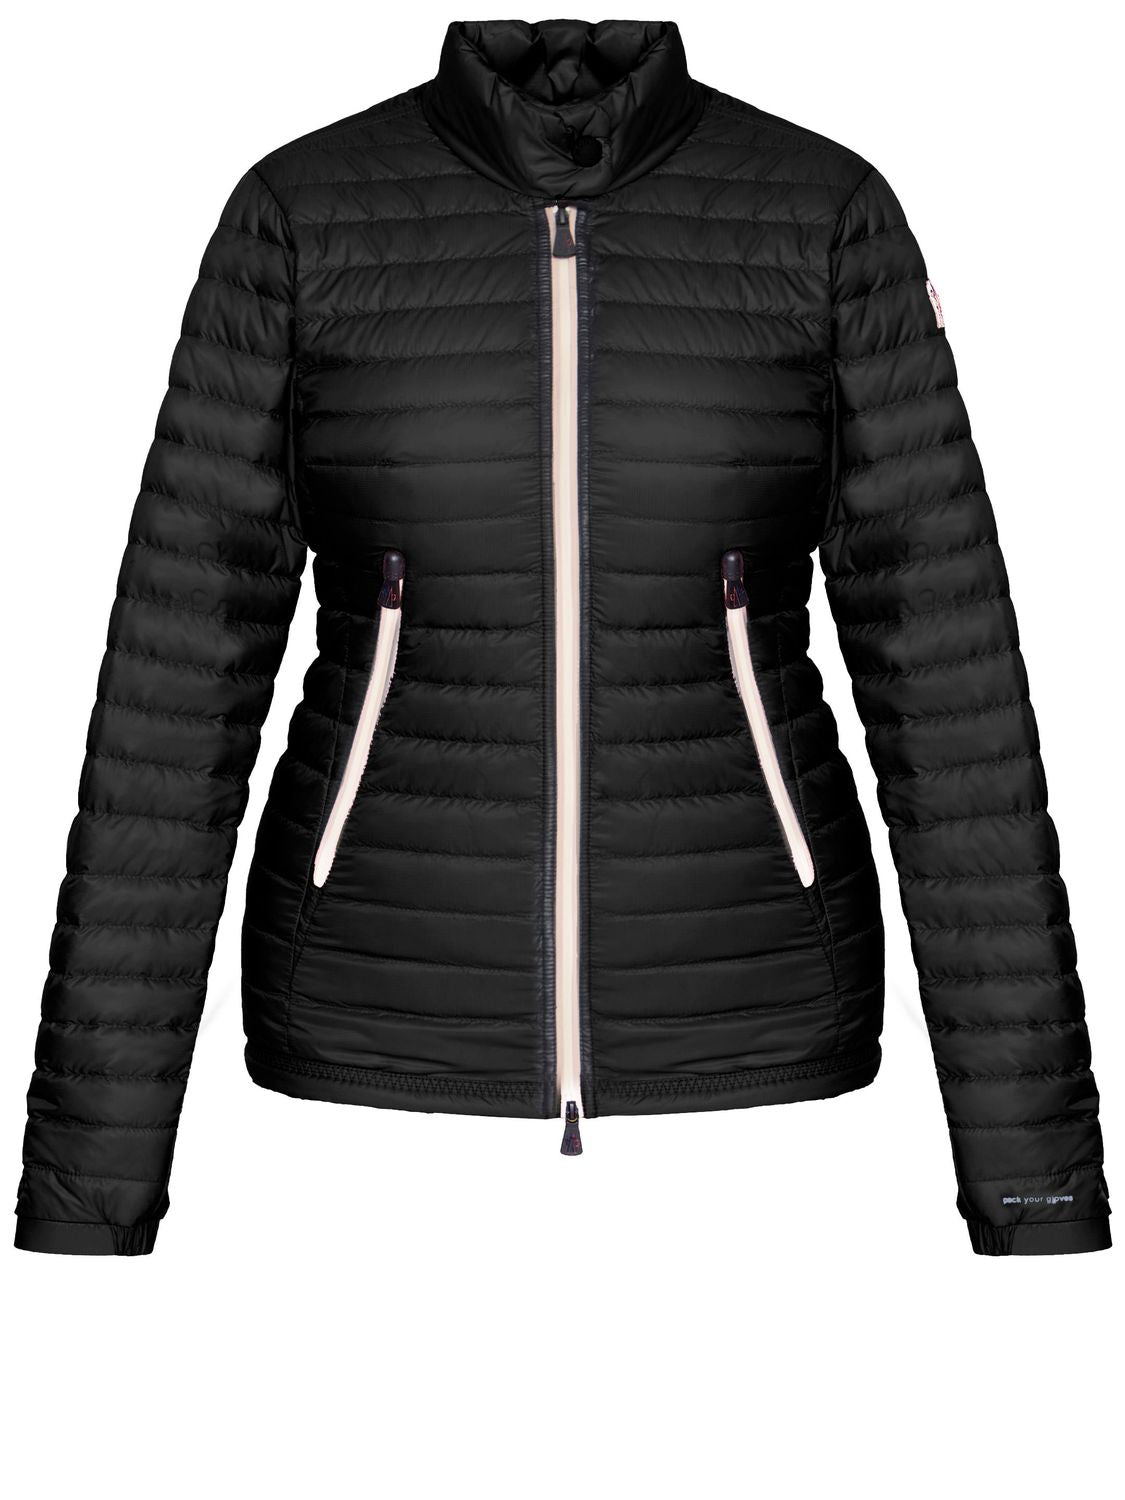 MONCLER GRENOBLE Black Short Down Jacket for Women - Quilted Nylon with High Collar and Logo Patch